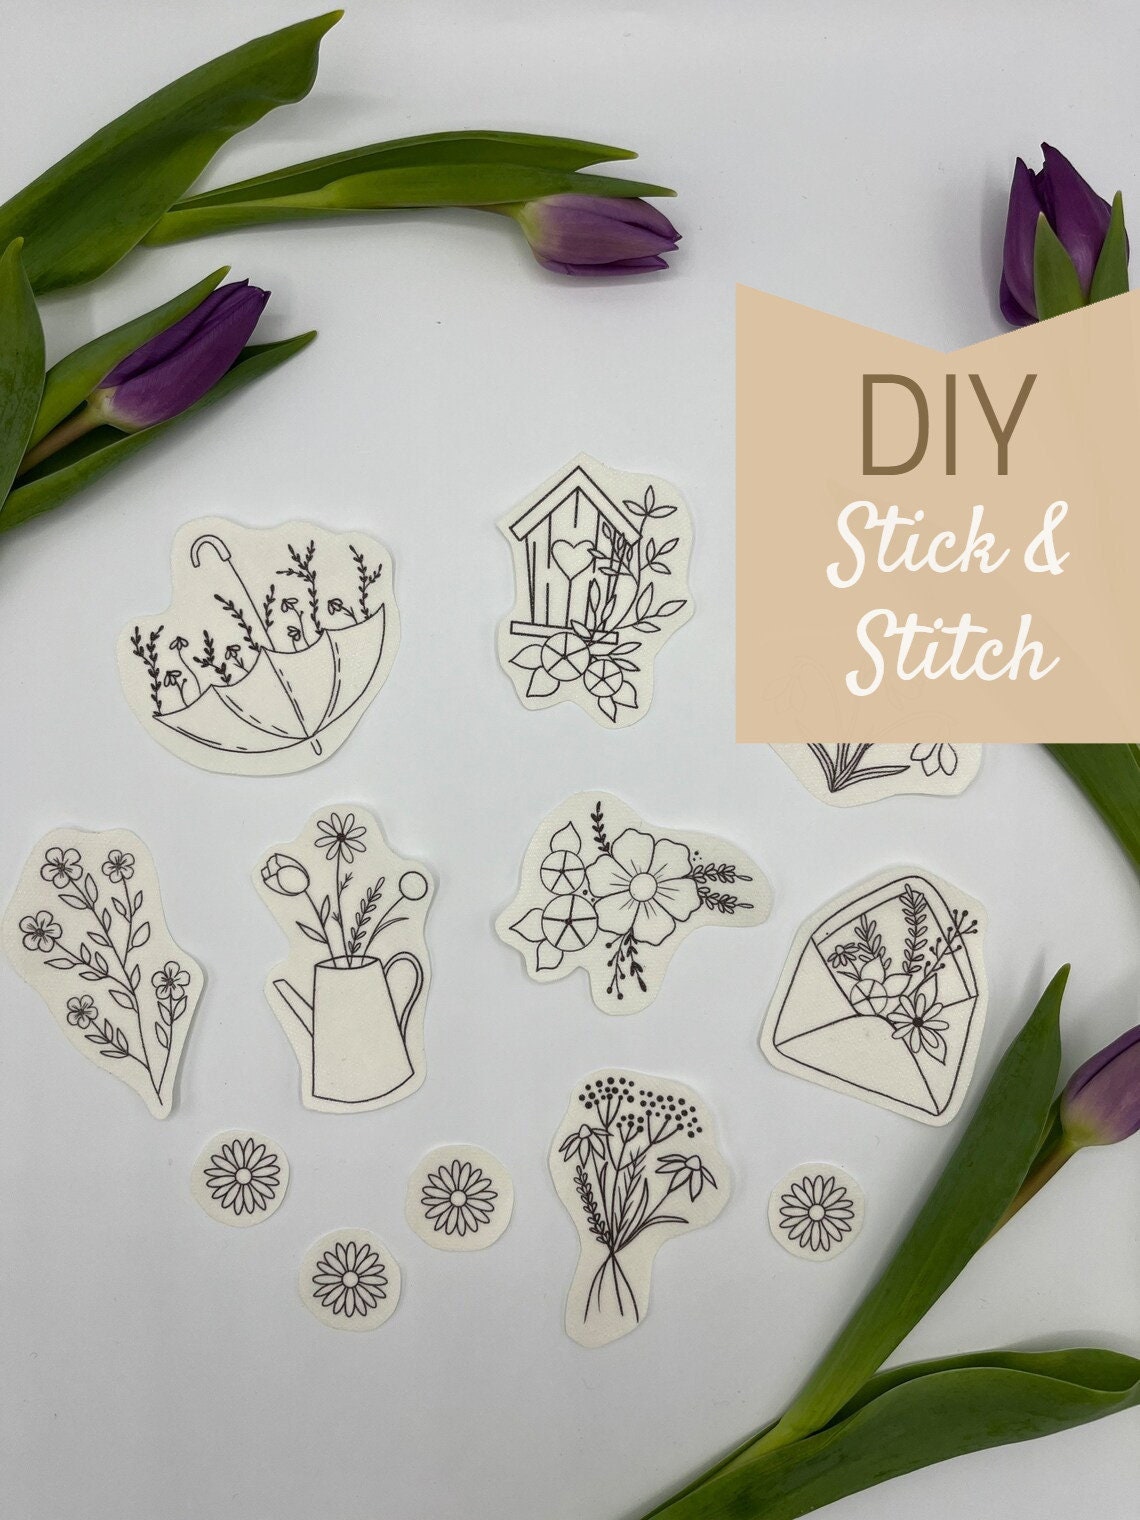 Stick and Stitch / Star Pack / Water Soluble Embroidery Stickers